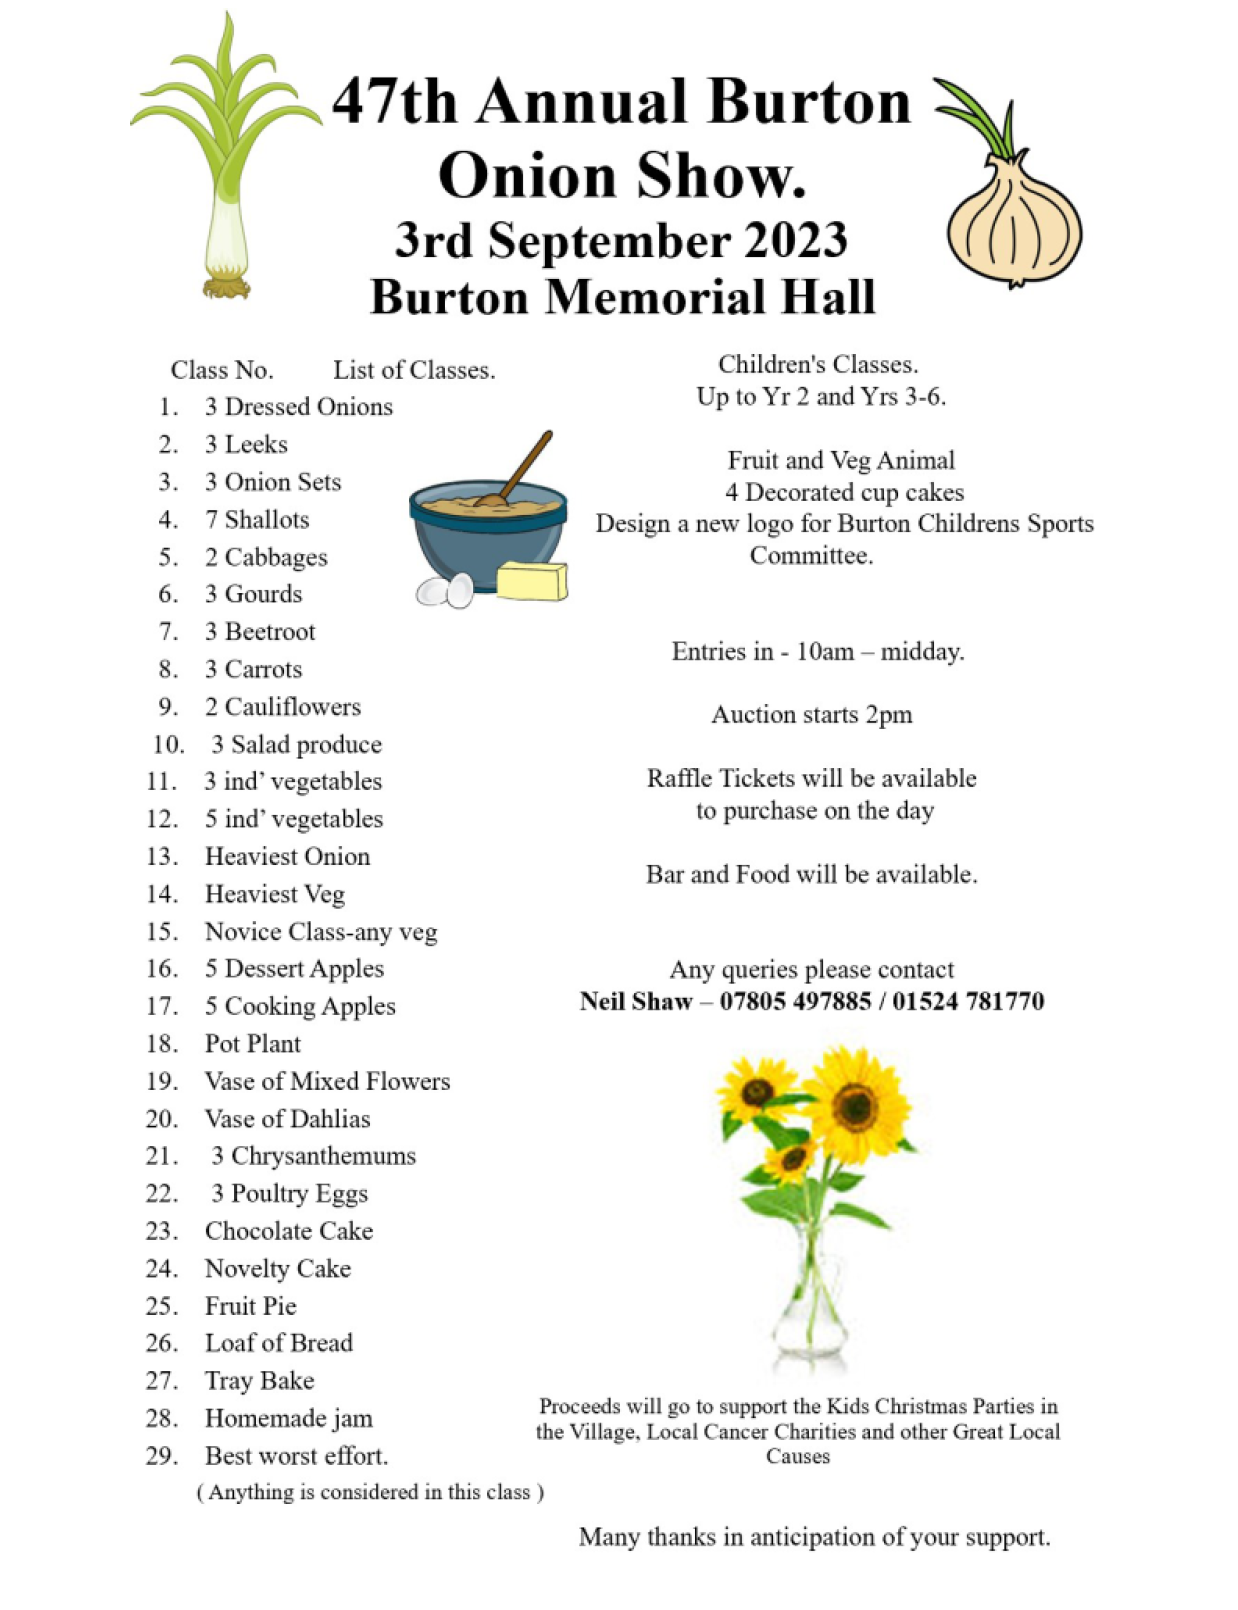 Poster and list of class entries for the Burton in Kendal Annual Onion Show at Burton Memorial Hall on Sunday 3rd September 2023